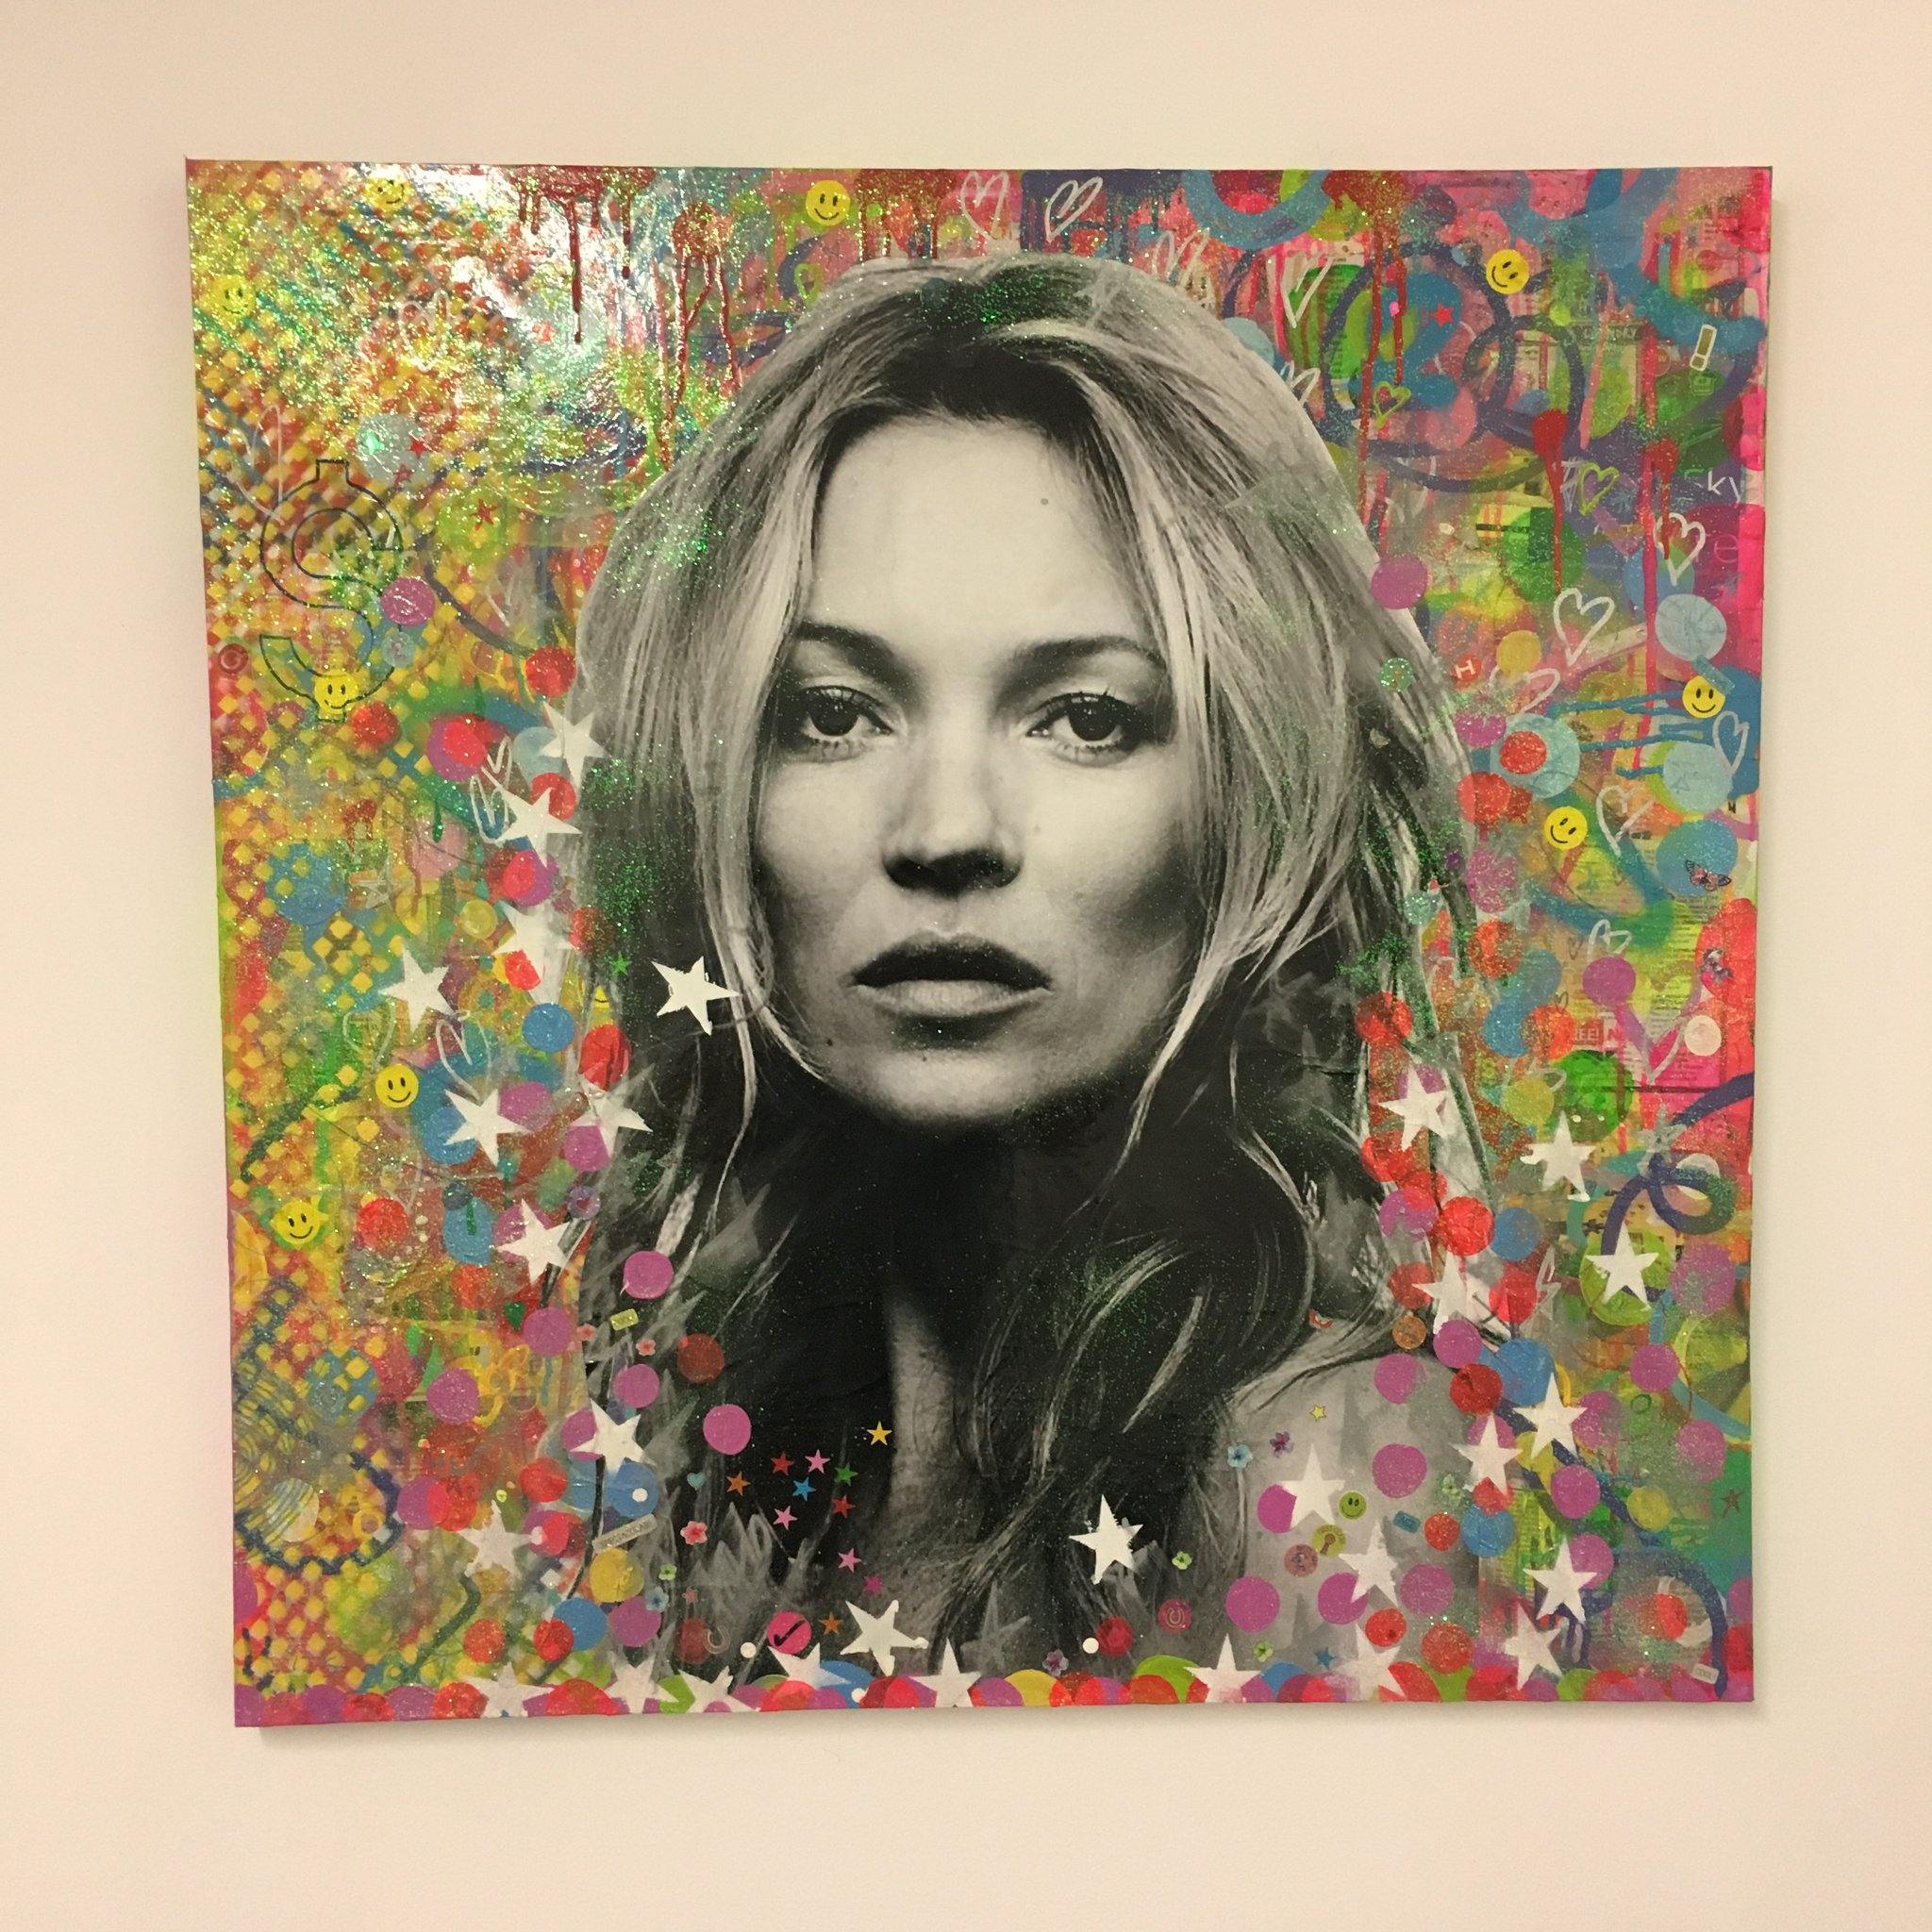 Super Kate by Barrie J Davies 2018, Mixed media on canvas, 90cm x 90cm, unframed. Barrie J Davies is an Artist - Pop Art and Street art inspired Artist based in Brighton England UK - Pop Art Paintings, Street Art Prints & Editions available. 